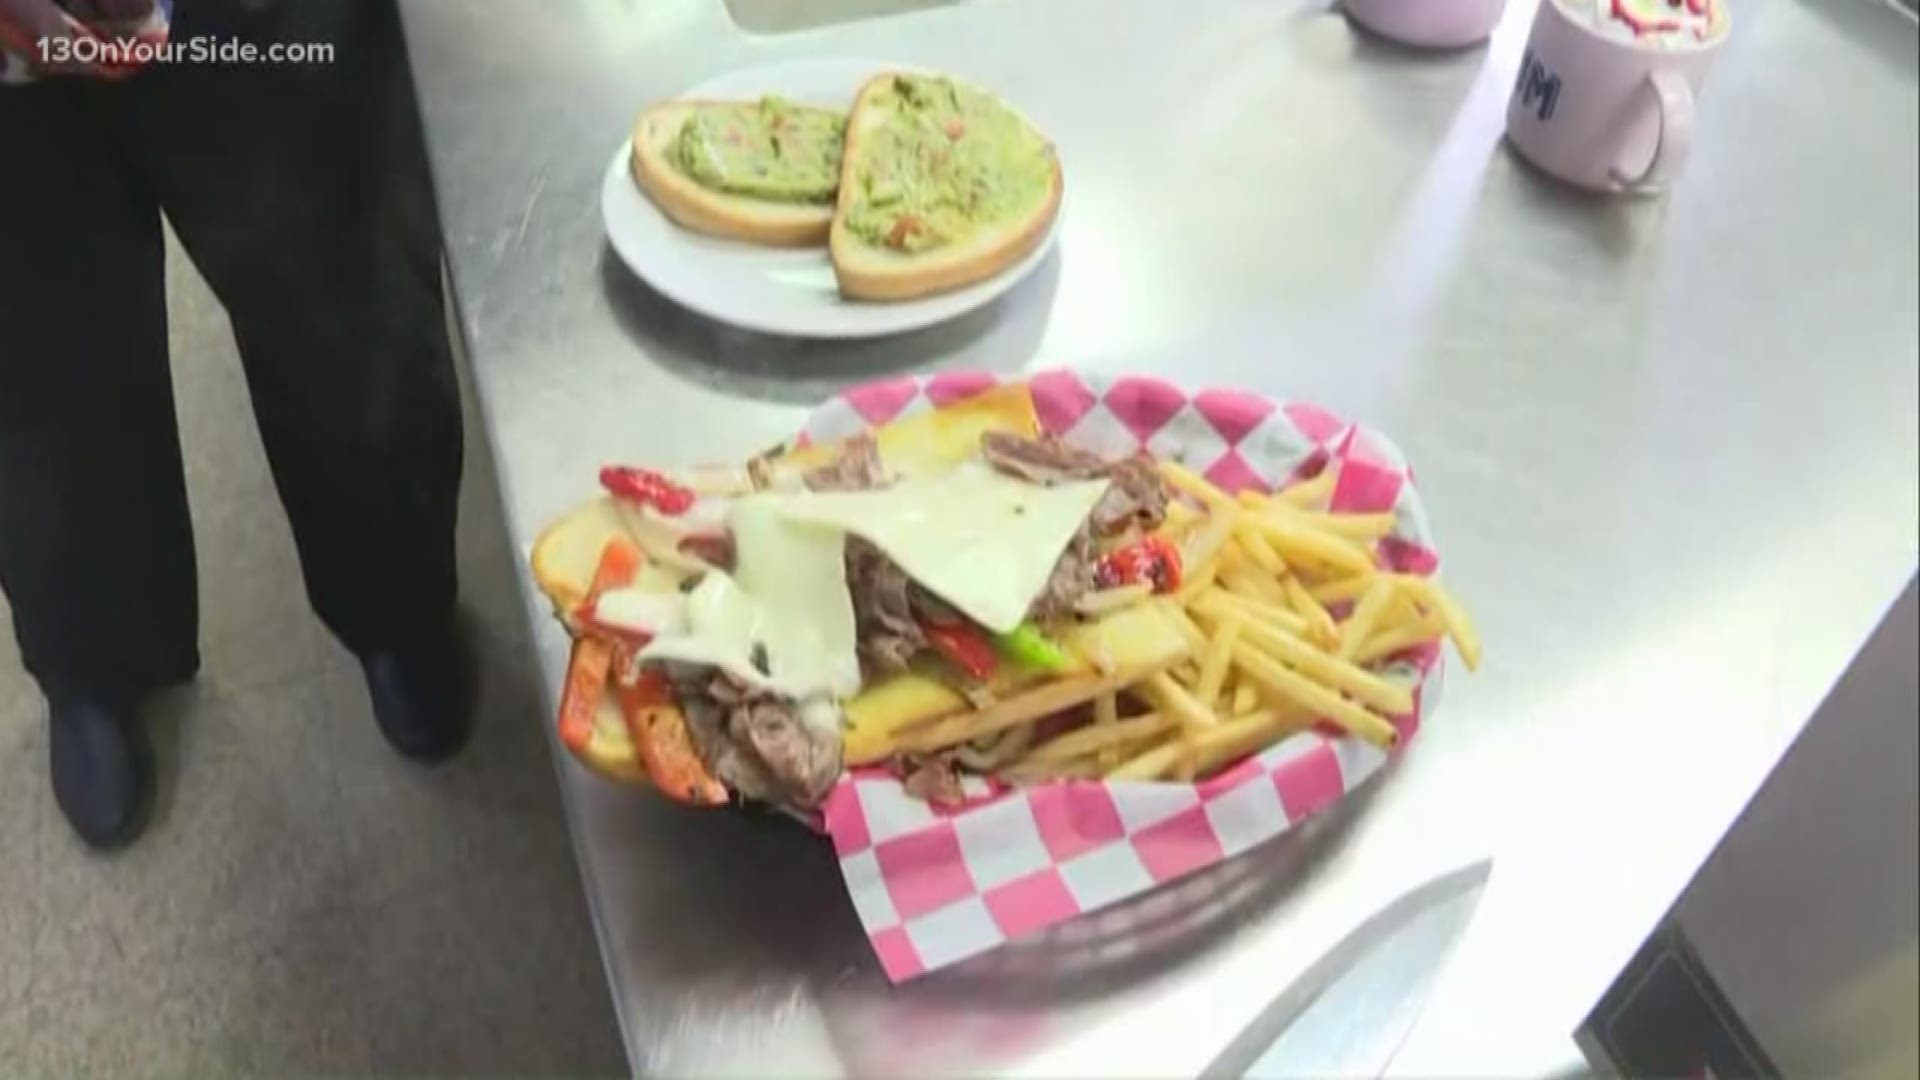 13 ON YOUR SIDE's Angela Cunningham got an inside look at the popular food truck's new cafe in Kentwood.